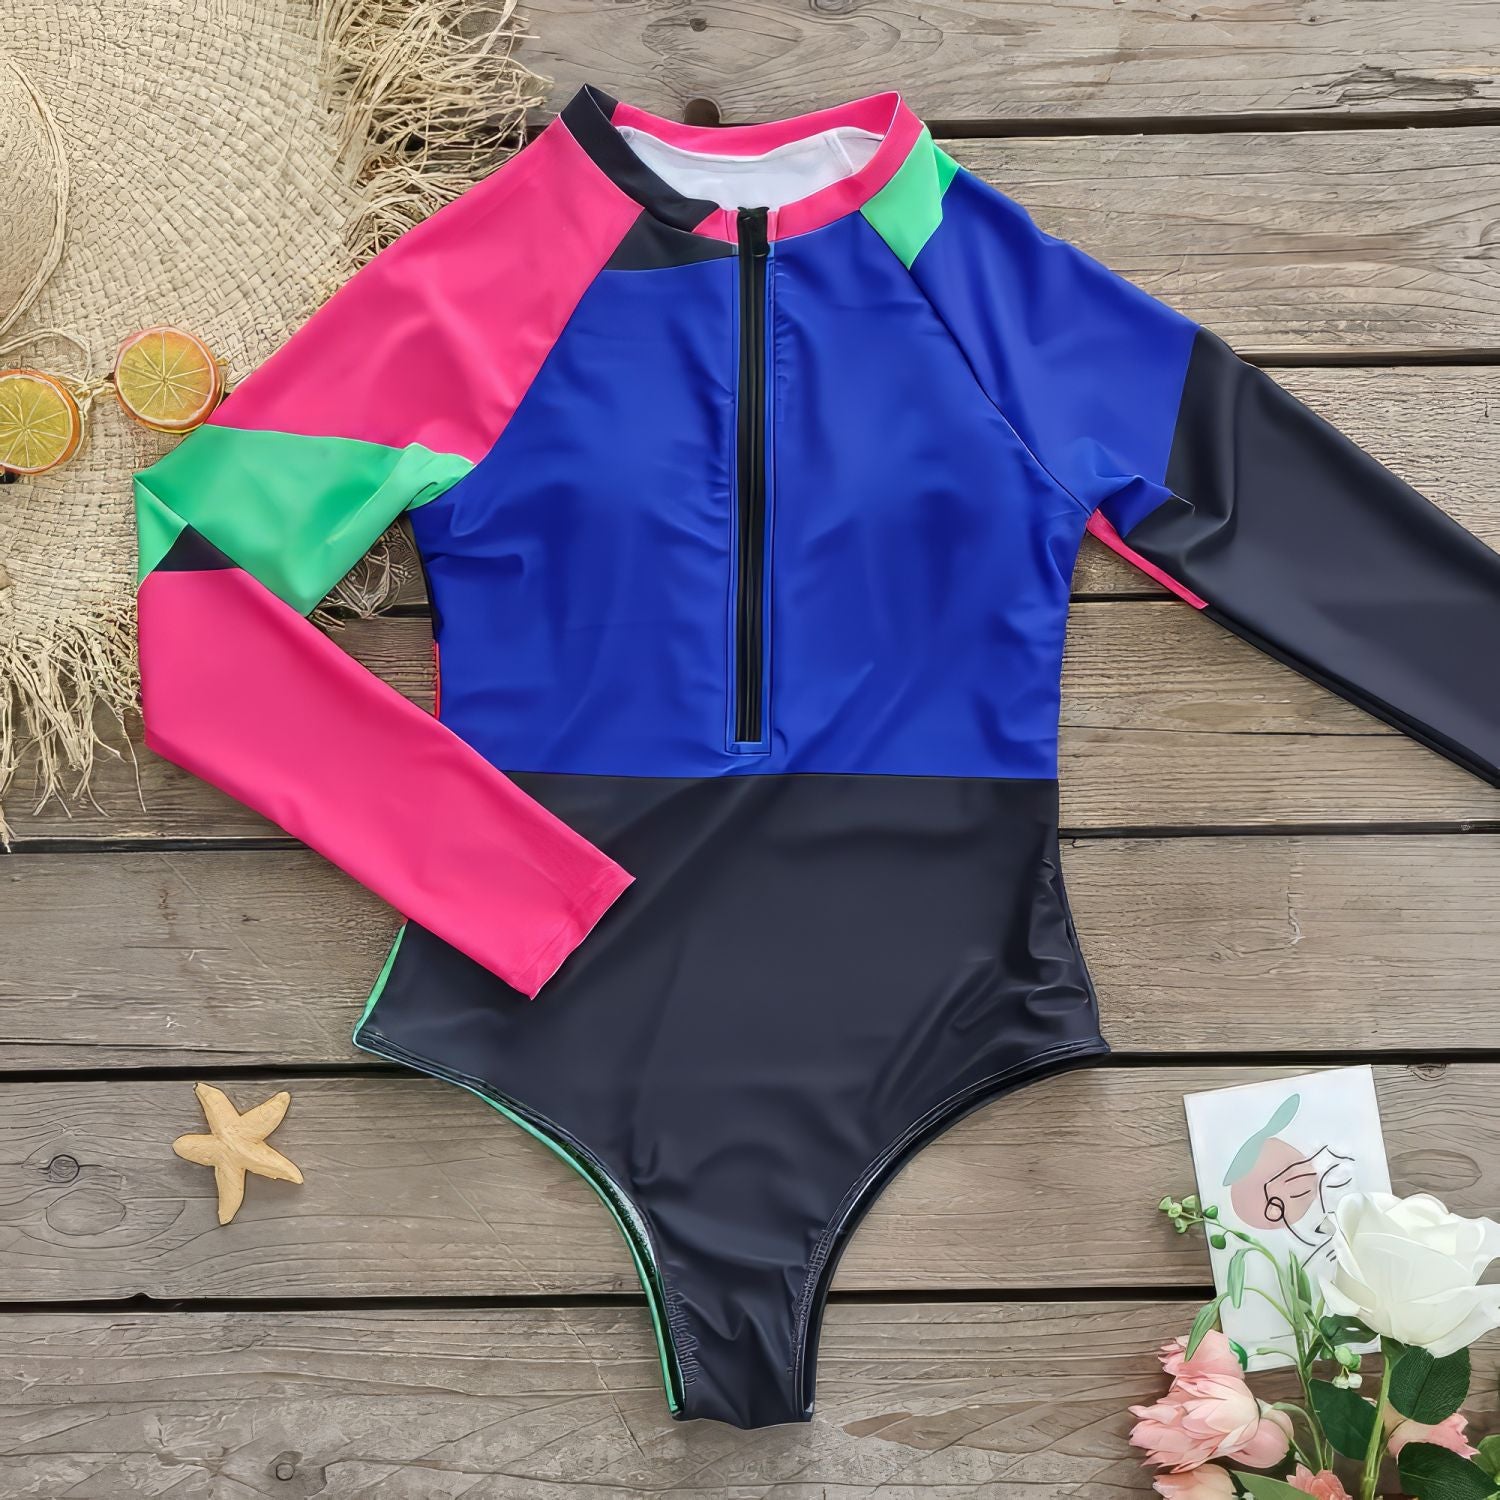 Floral Print Long Sleeve One Piece High Cut Surf Suits Swimsuit